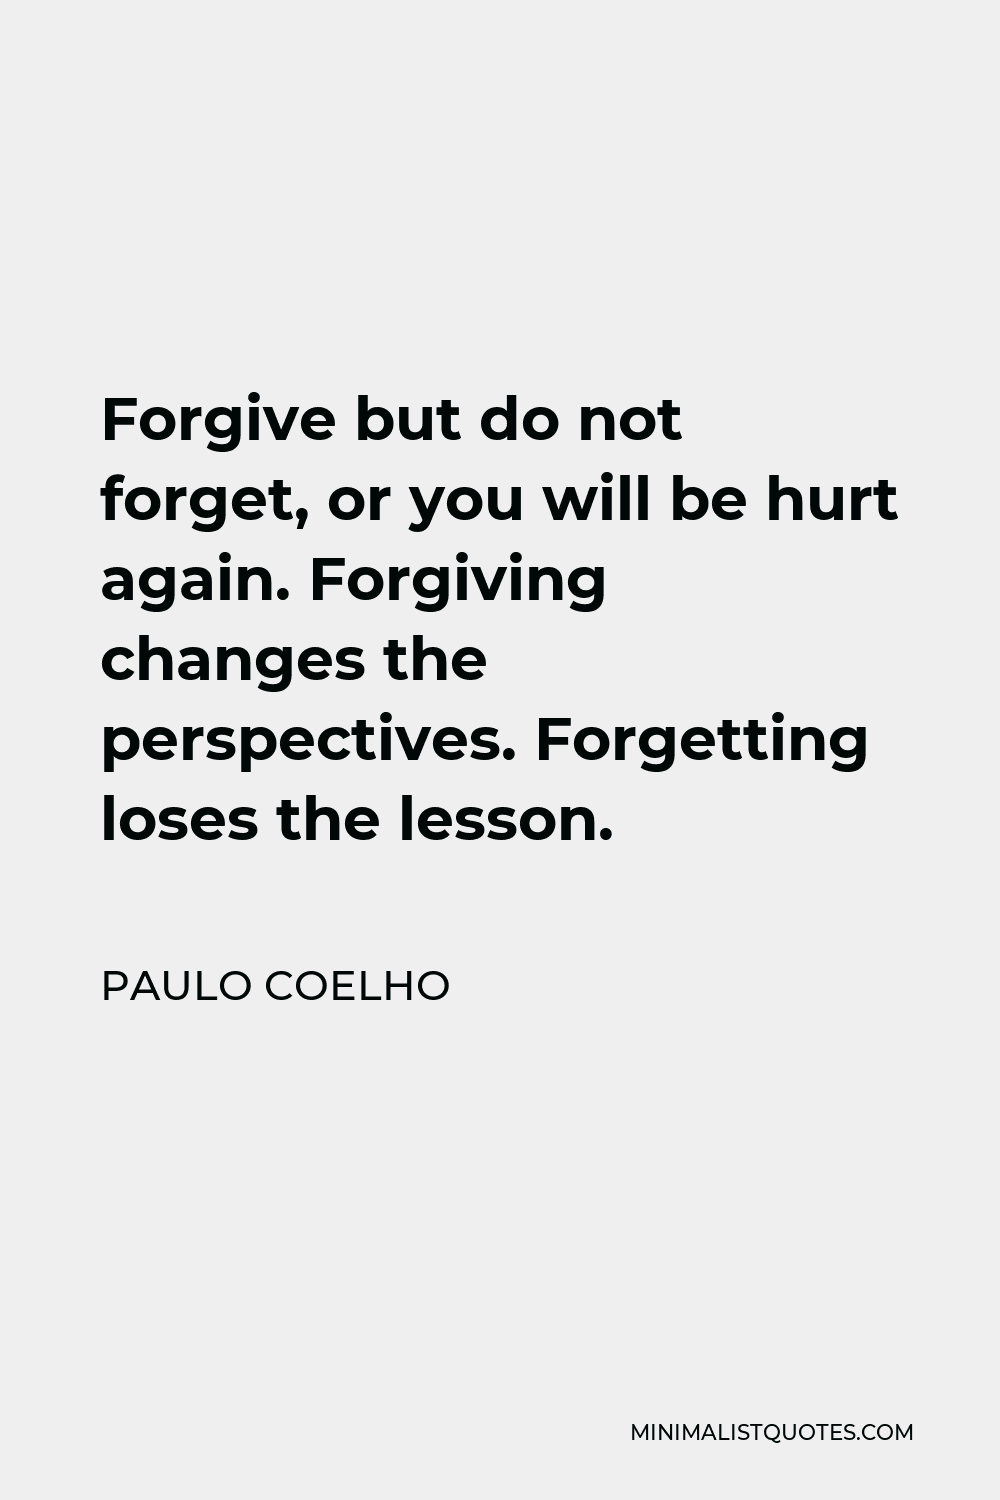 Paulo Coelho Quote - Forgive but do not forget, or you will be hurt again. Forgiving changes the perspectives. Forgetting loses the lesson.